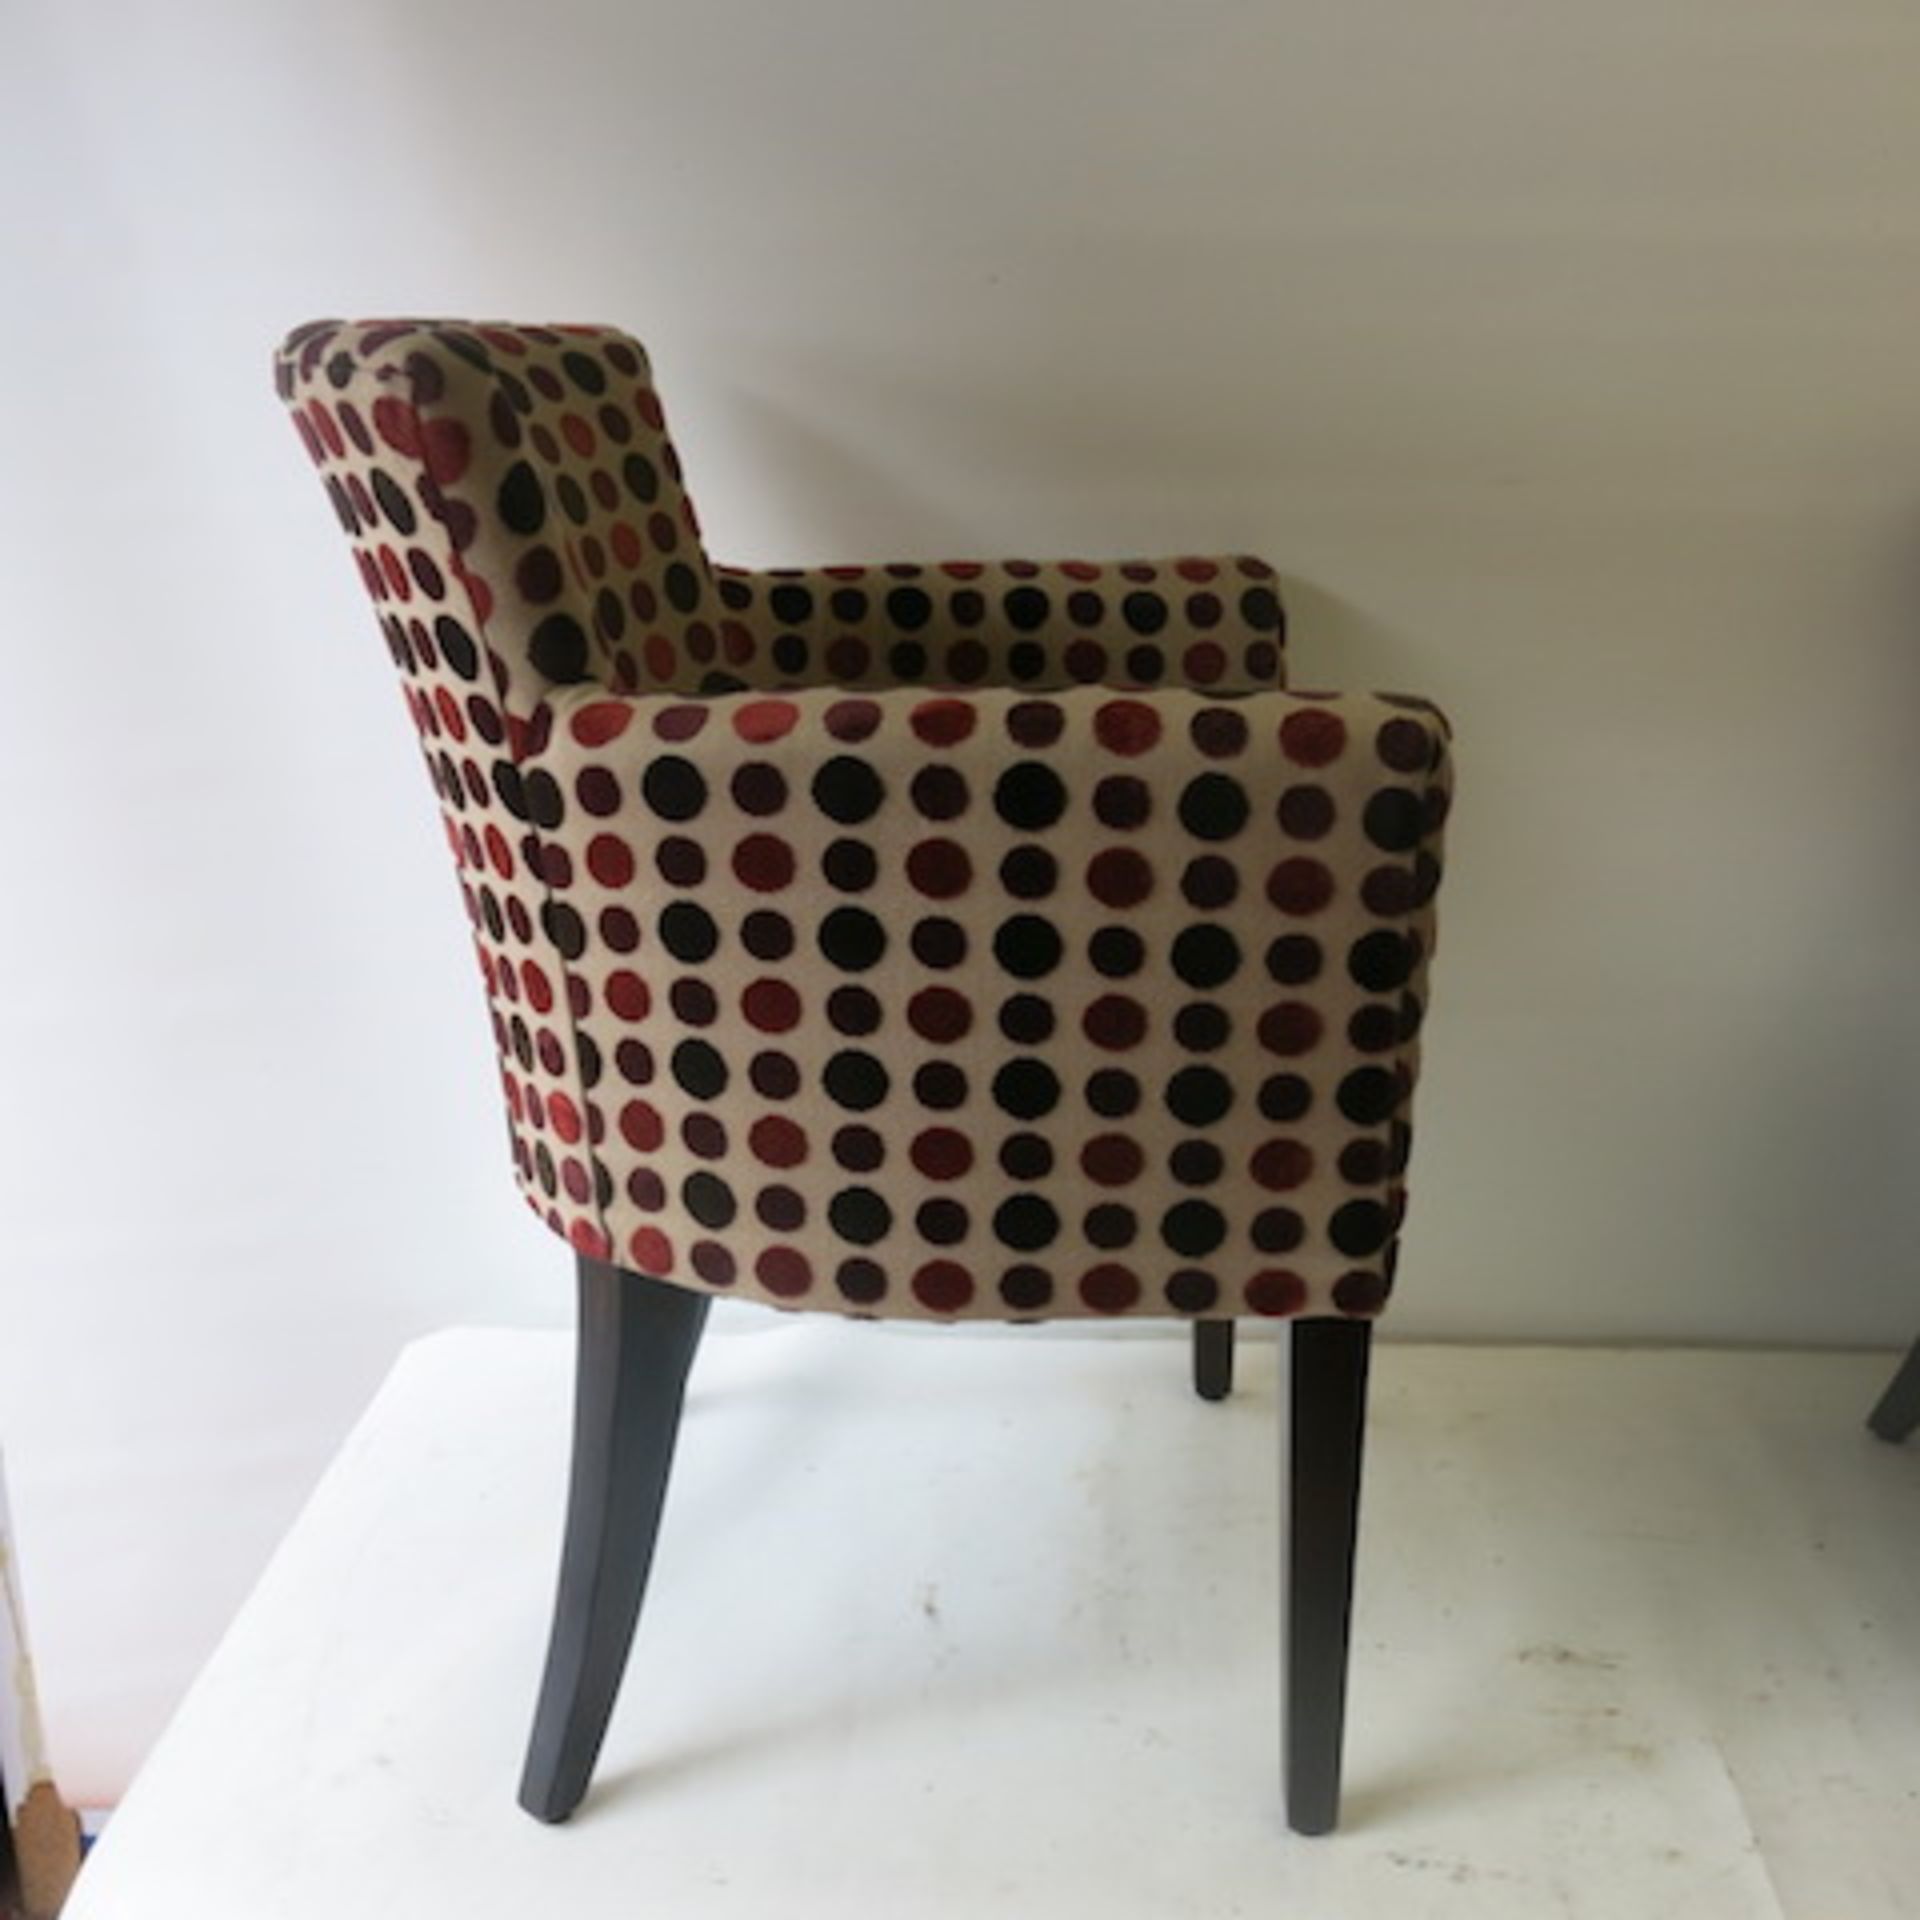 2 x Matching Armchairs with Crushed Velour Spot Pattern, Some light marks, but still in - Image 4 of 6